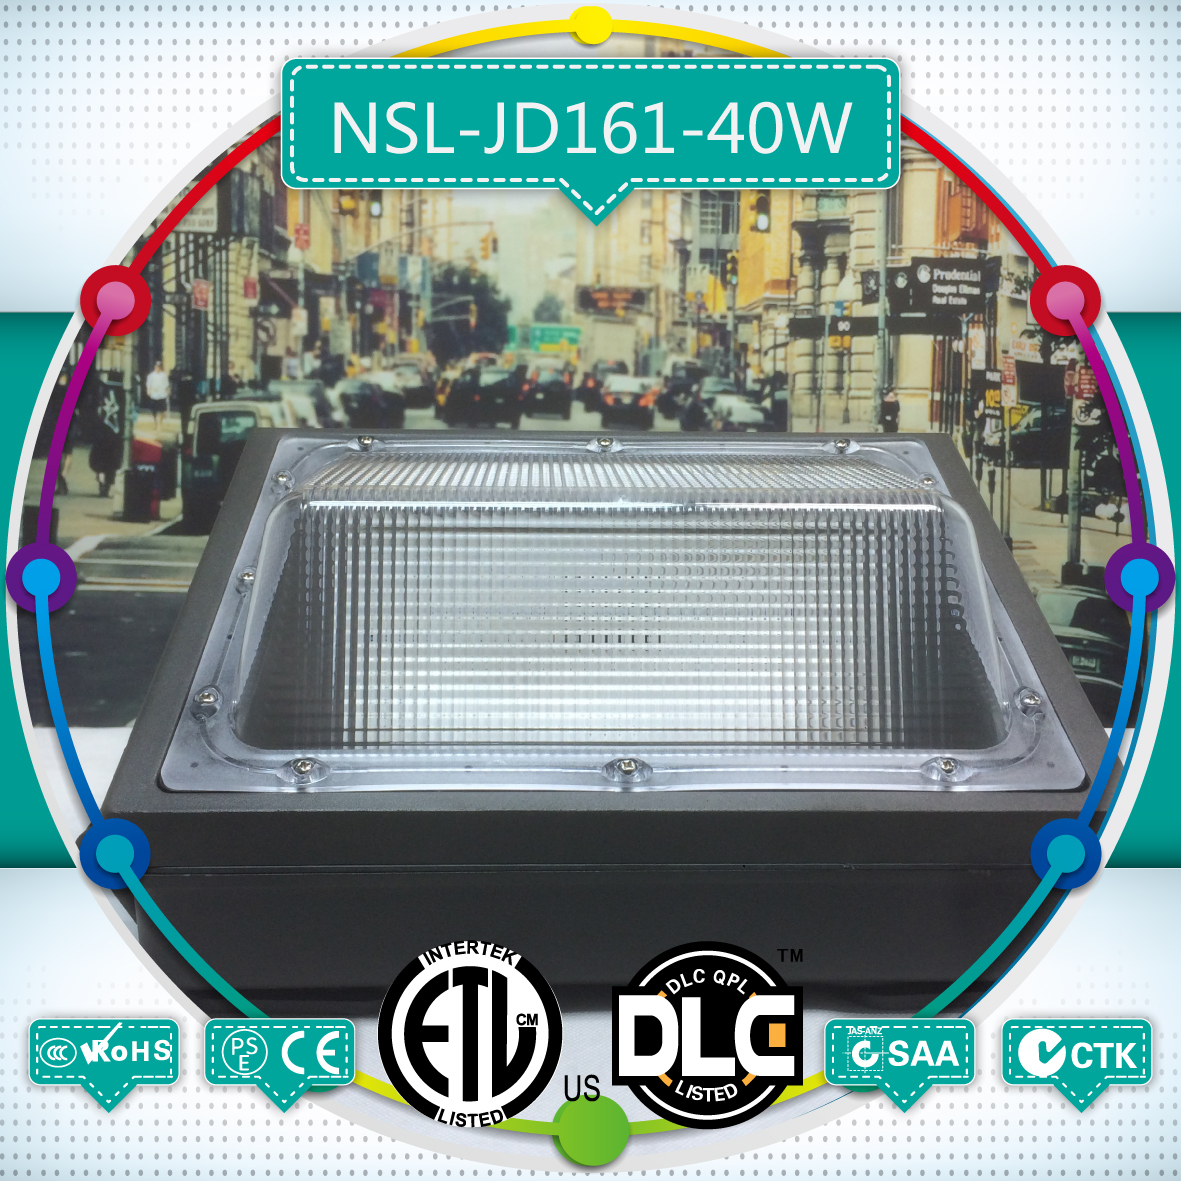 Sample free of charge 30w led wall pack industrial prior choiceul led wall pack maintenance slim